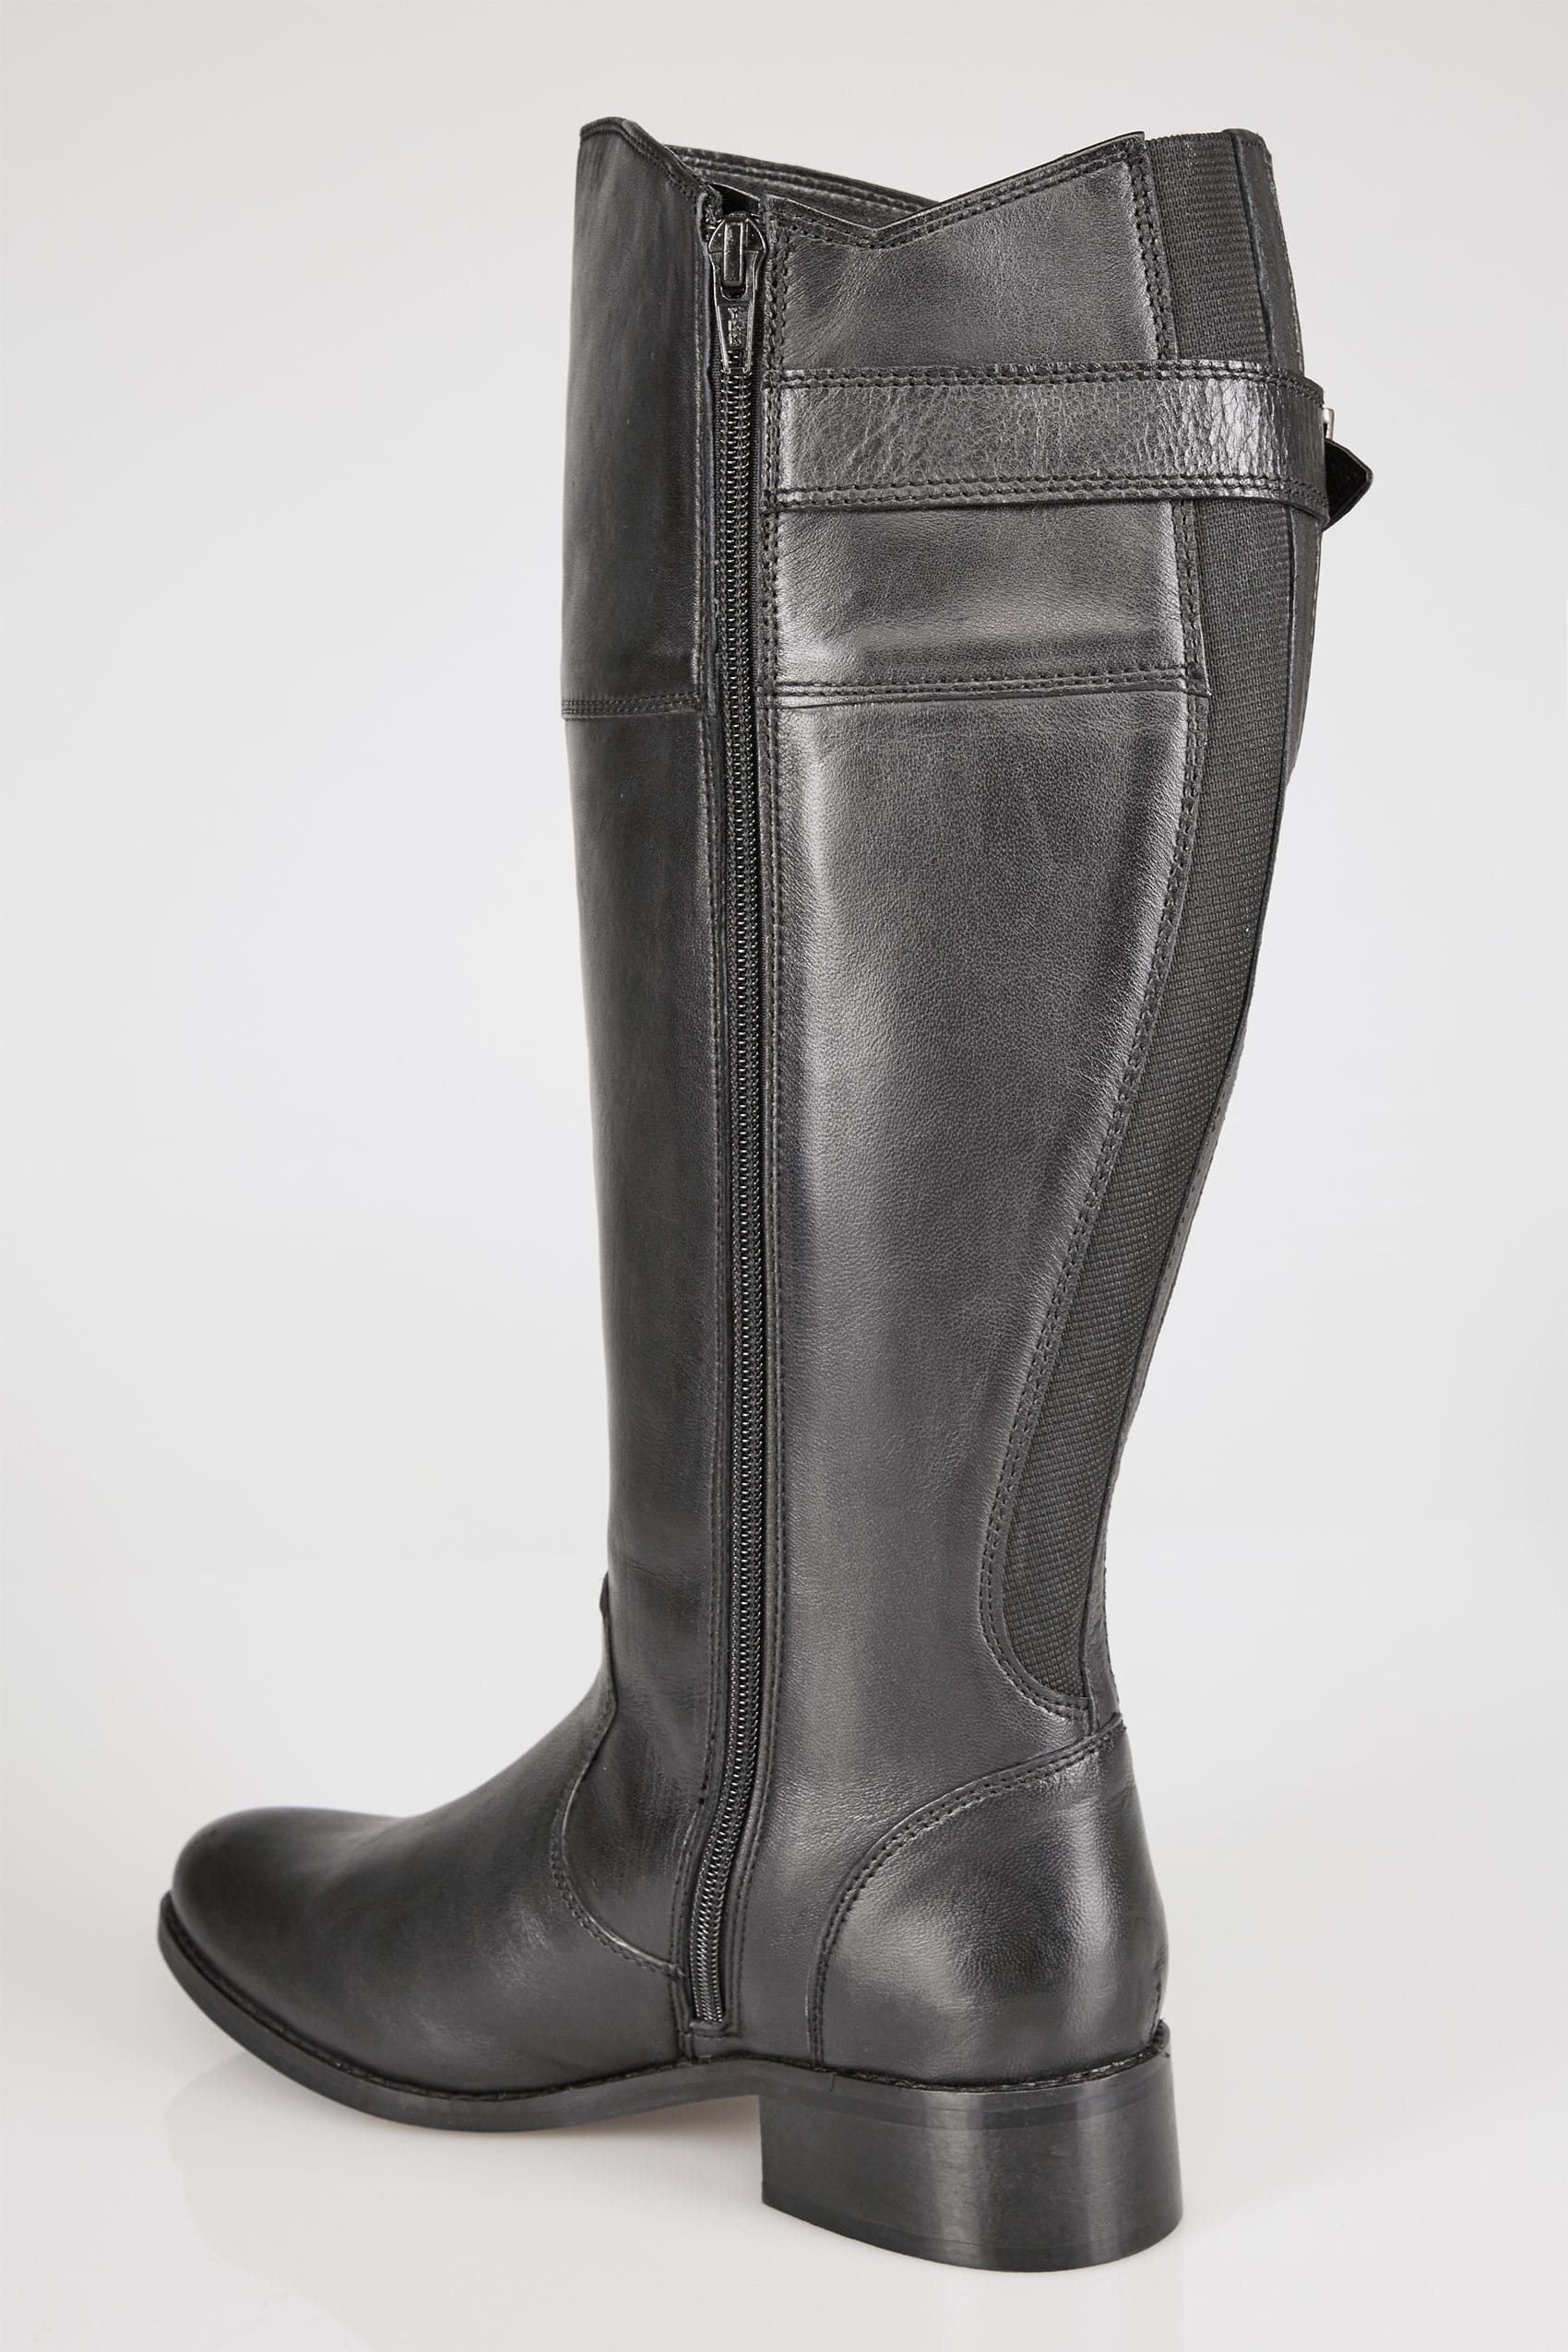 Black Knee High Leather Riding Boots With Elasticated Panels In EEE Fit